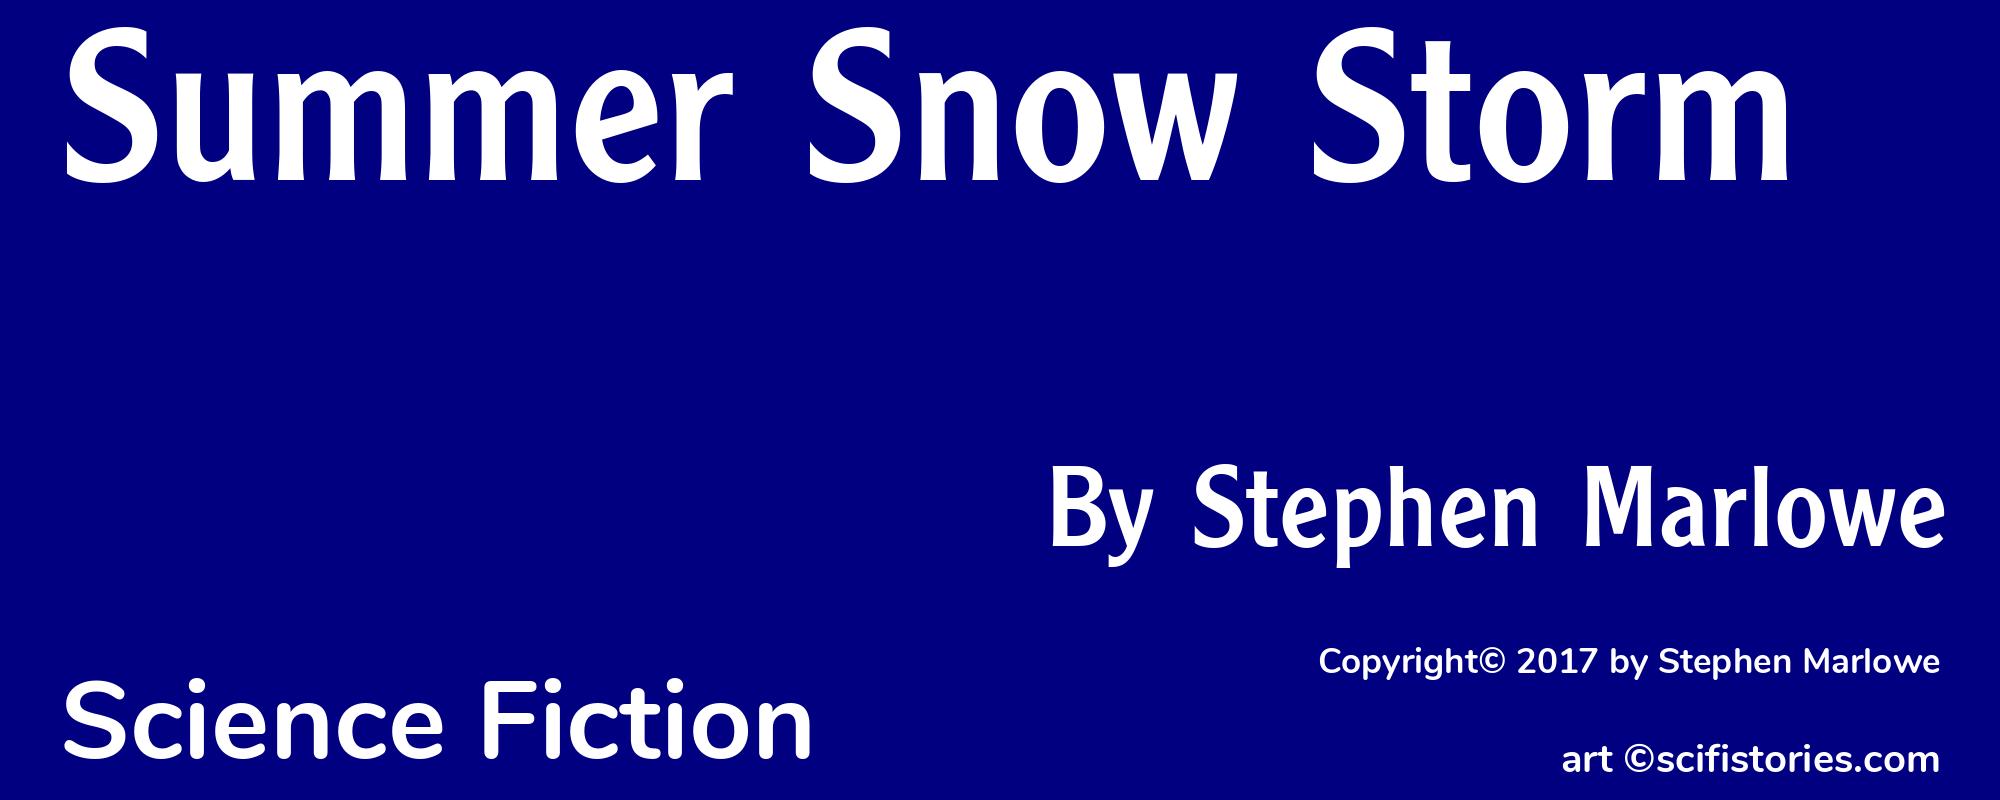 Summer Snow Storm - Cover